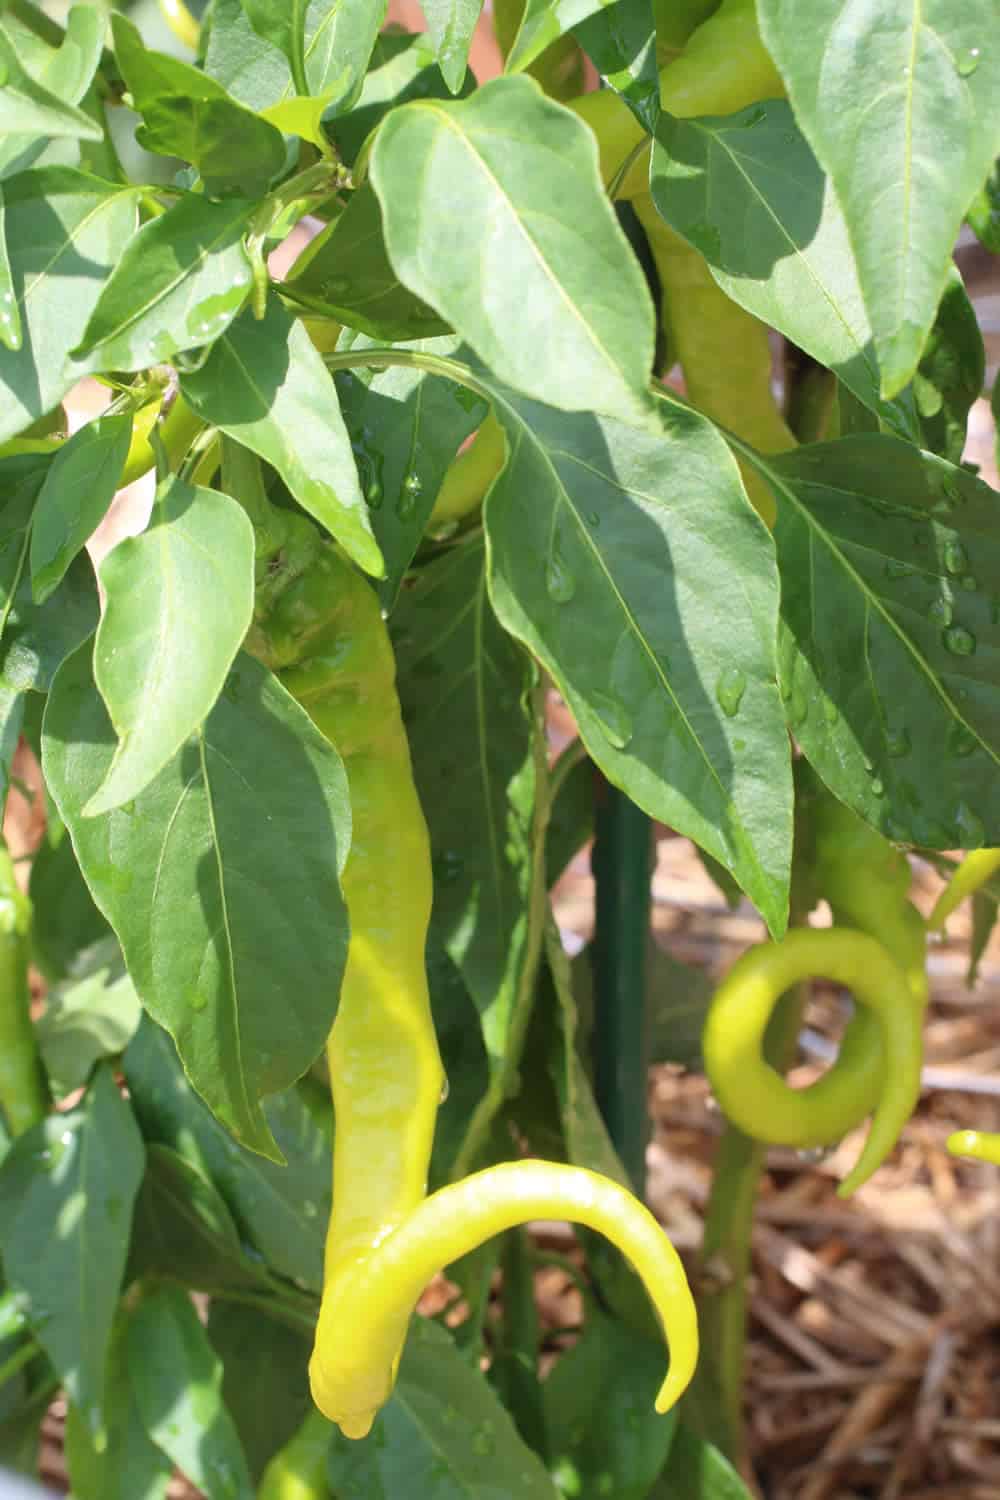 Growing Chili Peppers - Chili Peppers Love Water